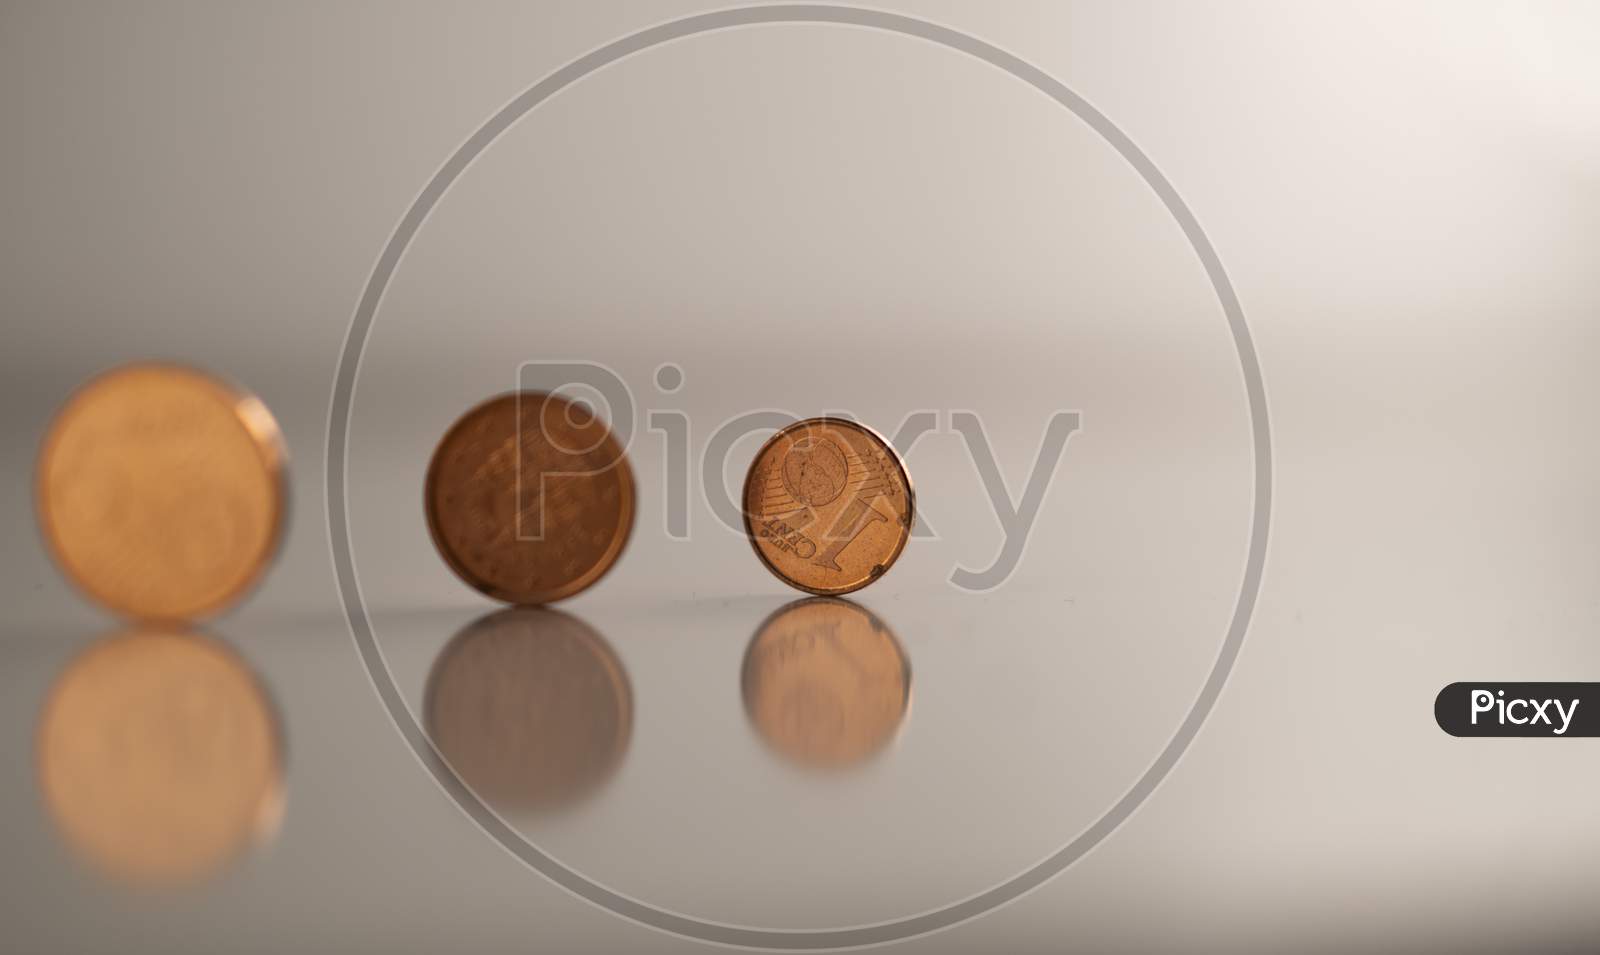 European cents (Coins) against a white background to highlight the collapsed World economy (Global recession) during Covid-19 (Coronavirus) pandemic through the vision of the economists.